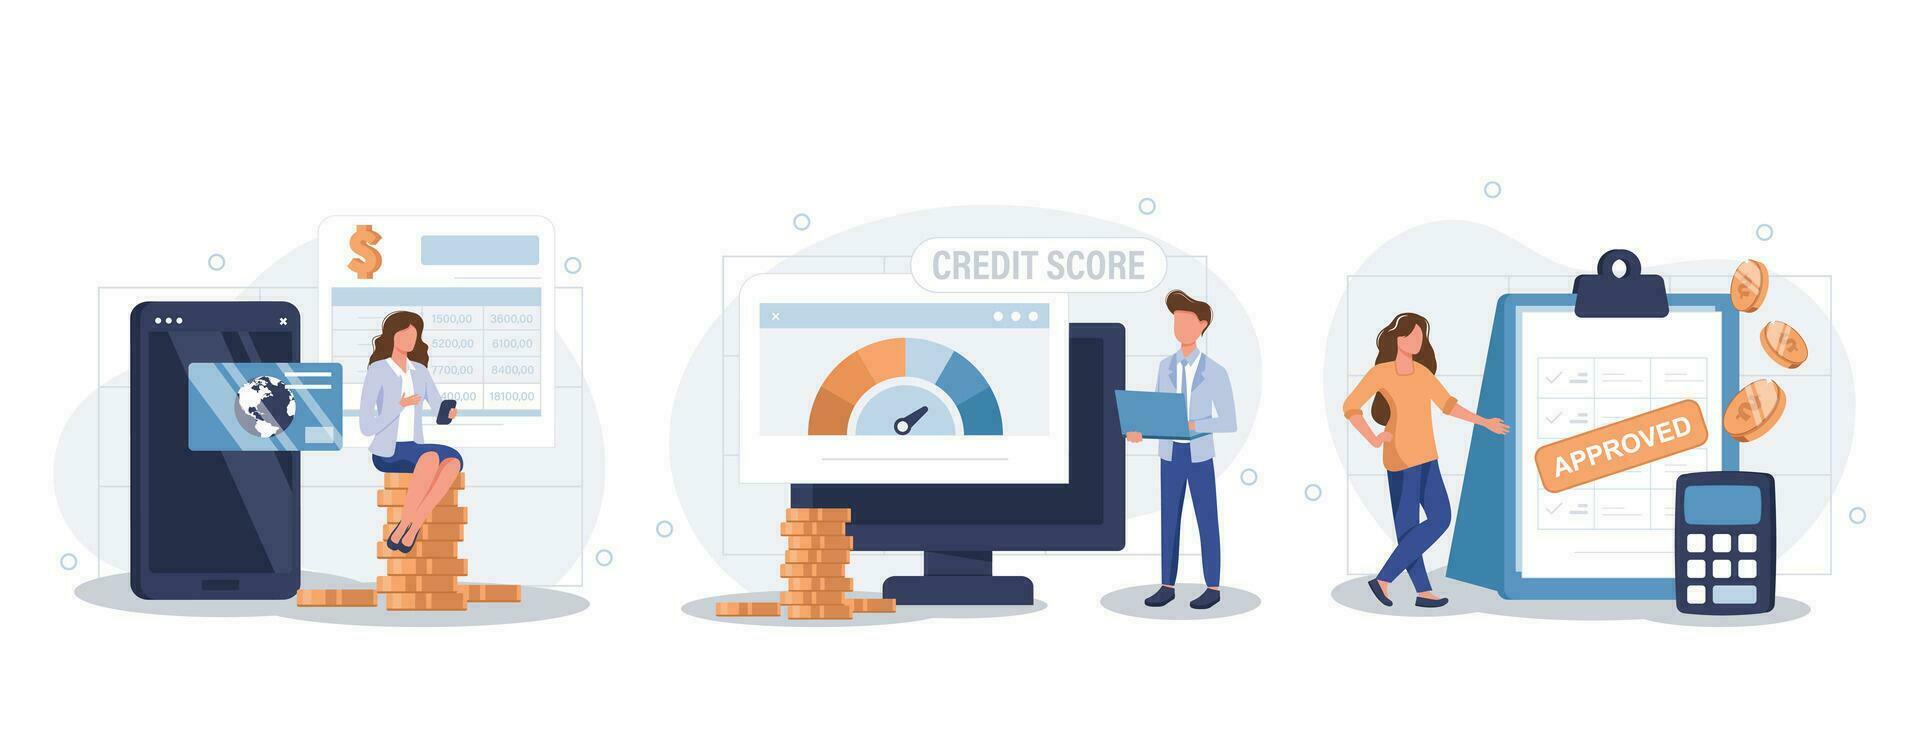 Credit approval illustration set. Characters with good credit score receiving loan approval from bank. Personal finance concept. Vector illustration.